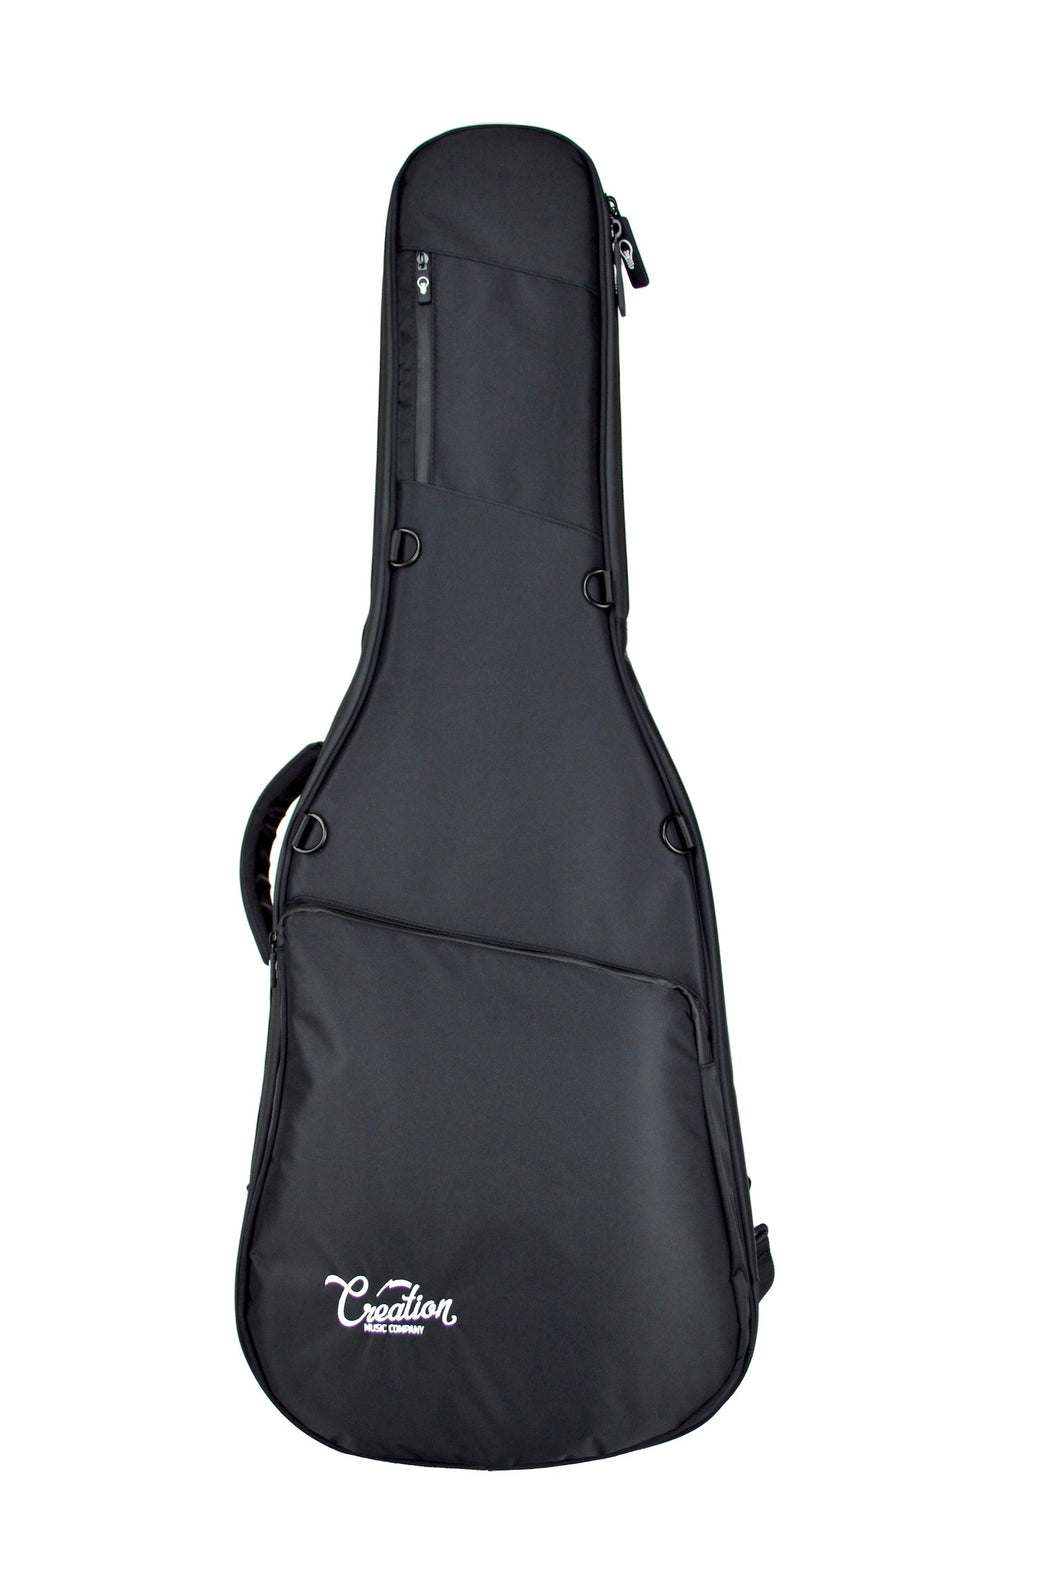 Mexa For Acoustic Guitar Bag For All Standard Size Guitar Padded Quality